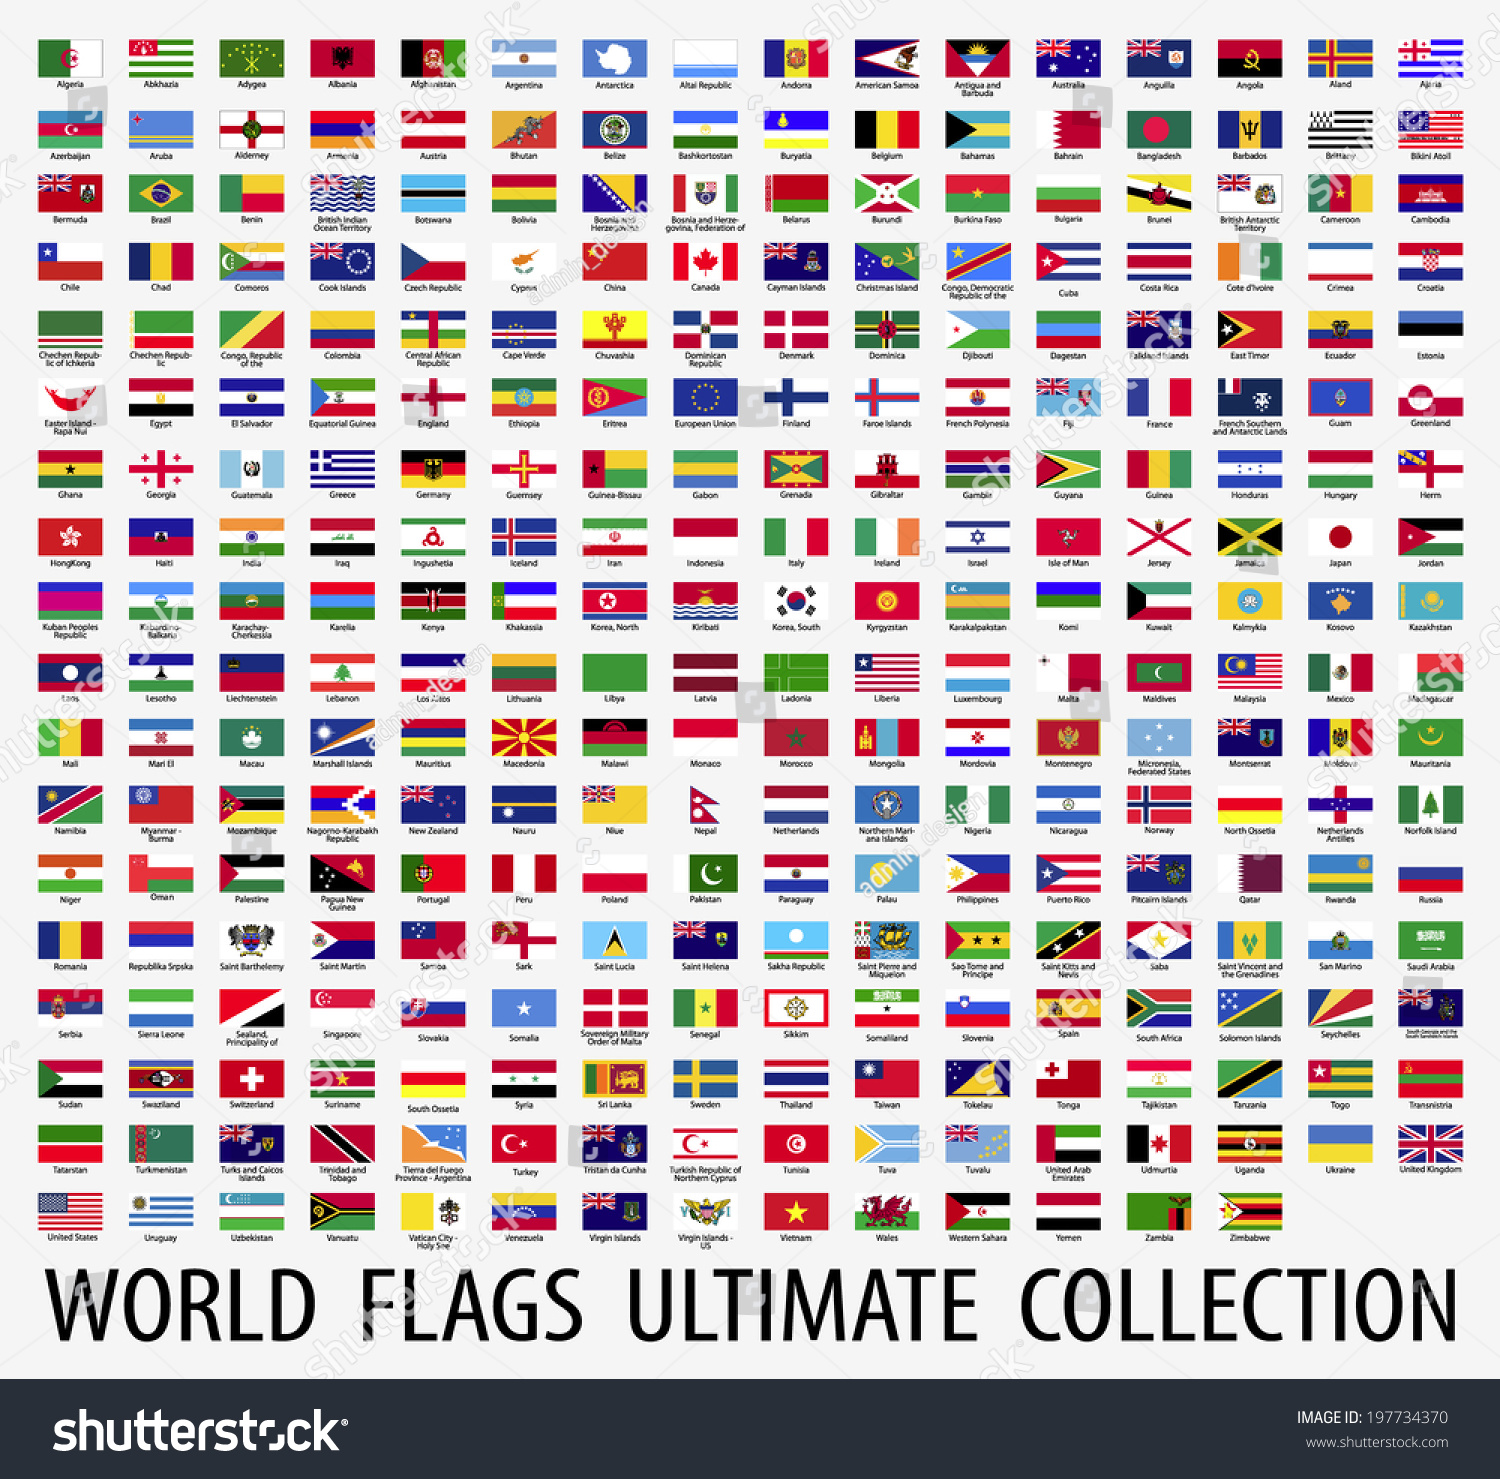 Flags vector of the world  #197734370